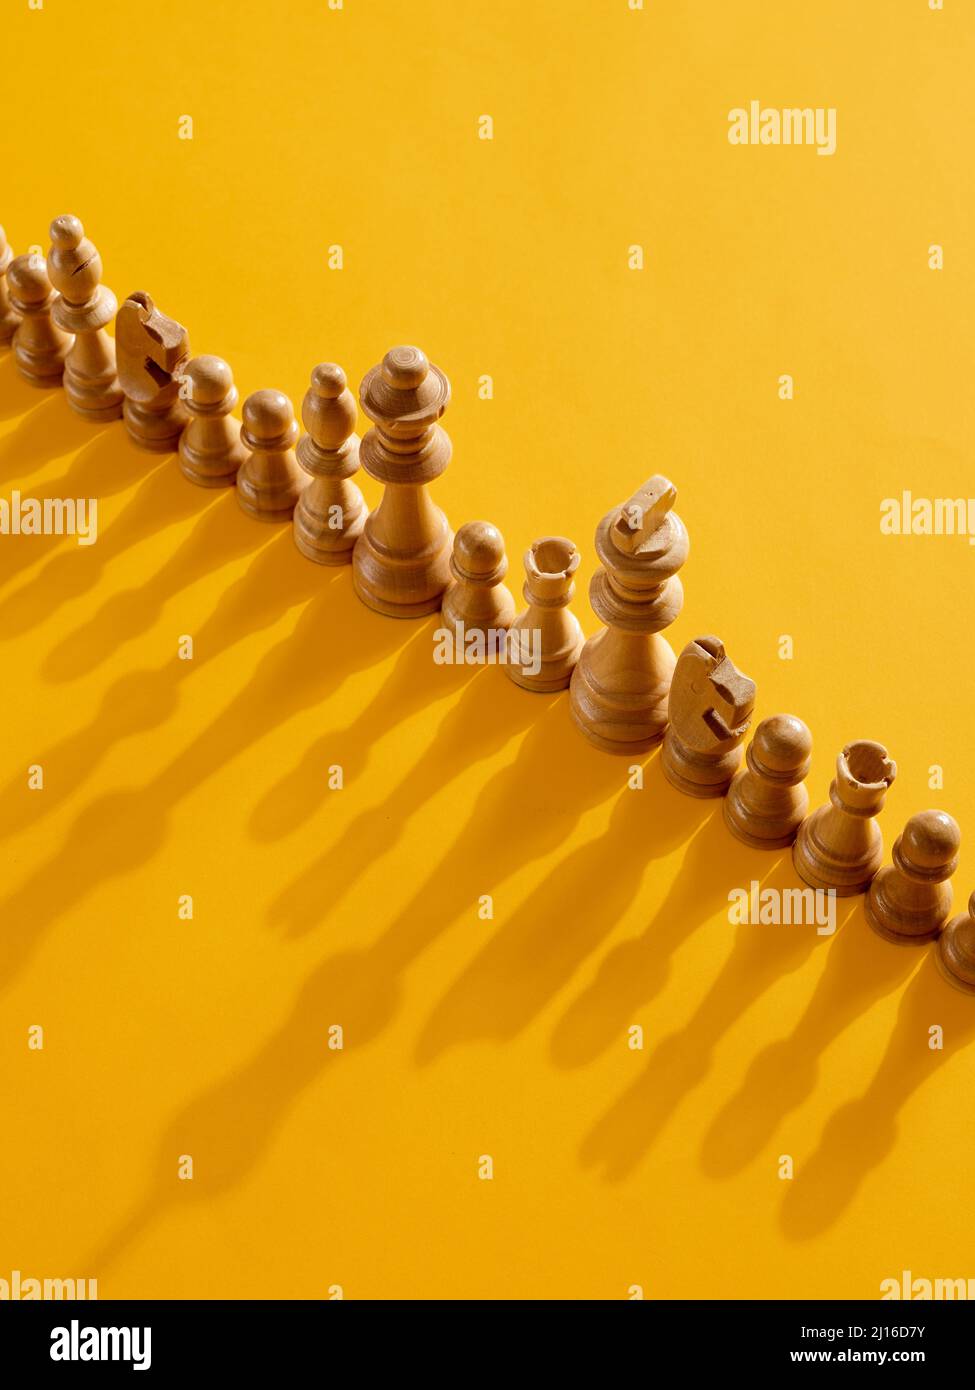 Chess piece parade ceremony on yellow background. Stock Photo